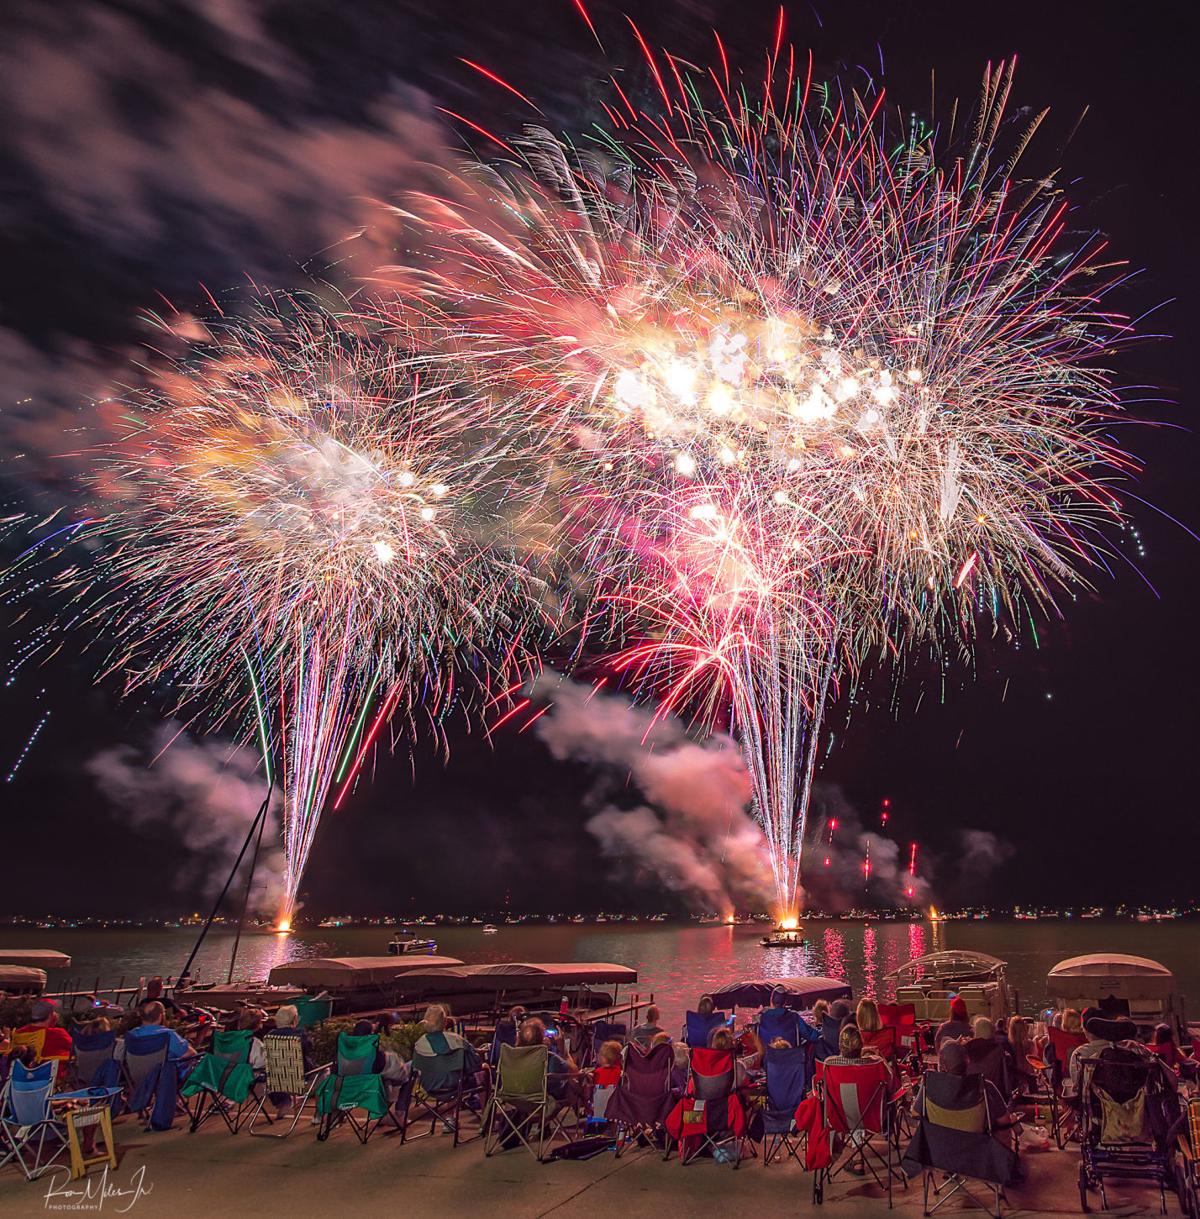 10 things you won’t want to miss at the Clear Lake Fourth of July